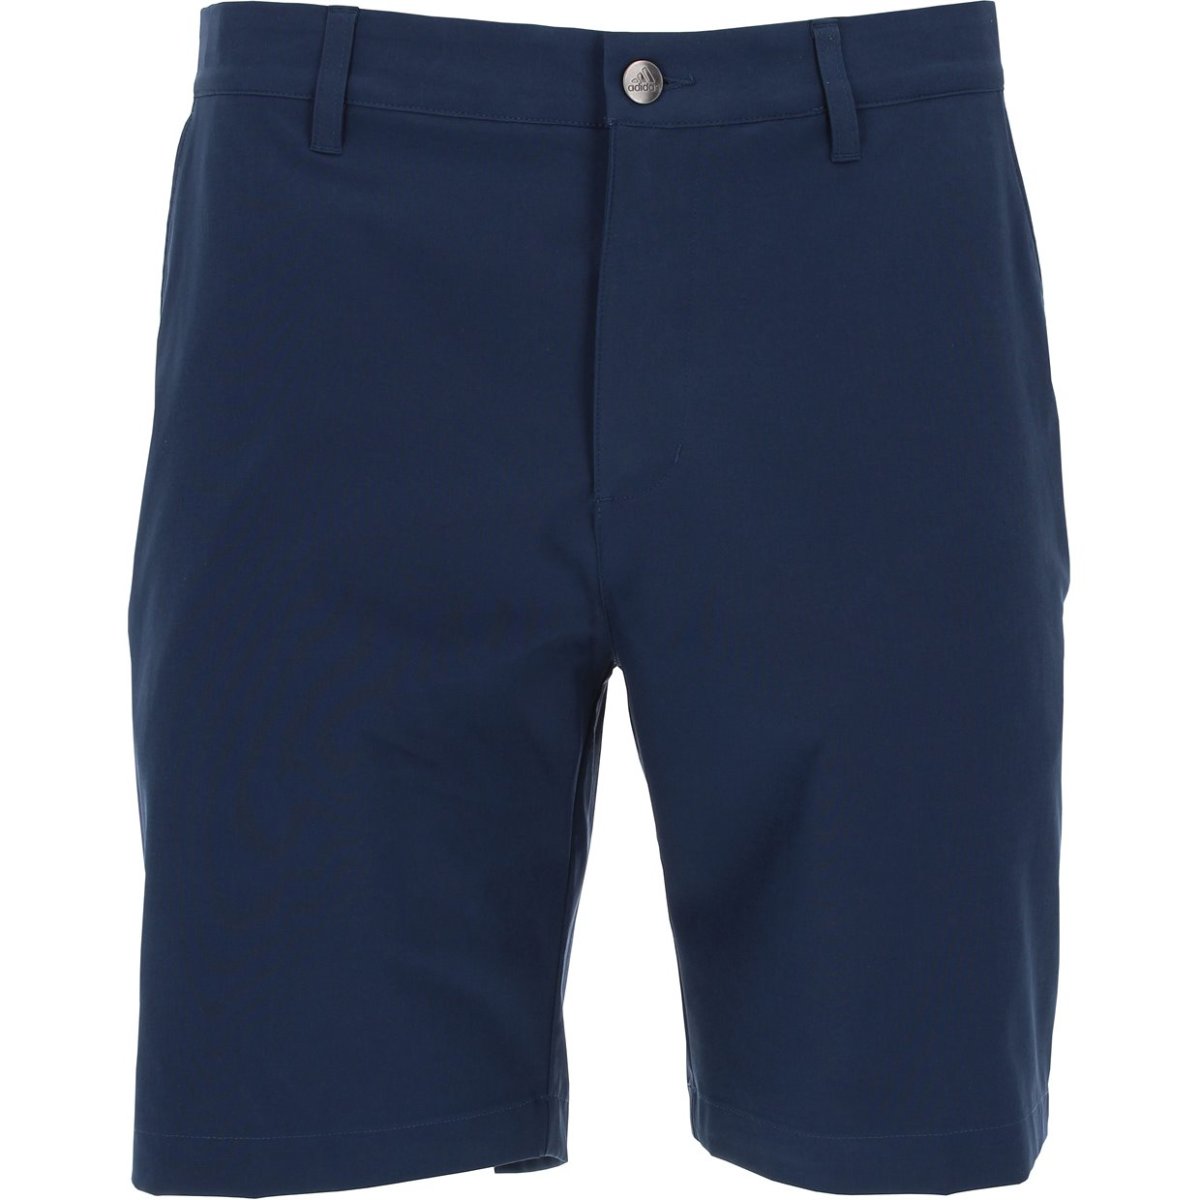 Shop Adidas golf shorts for men, like the Ultimate365, on Morning Read's online pro shop, powered by GlobalGolf.